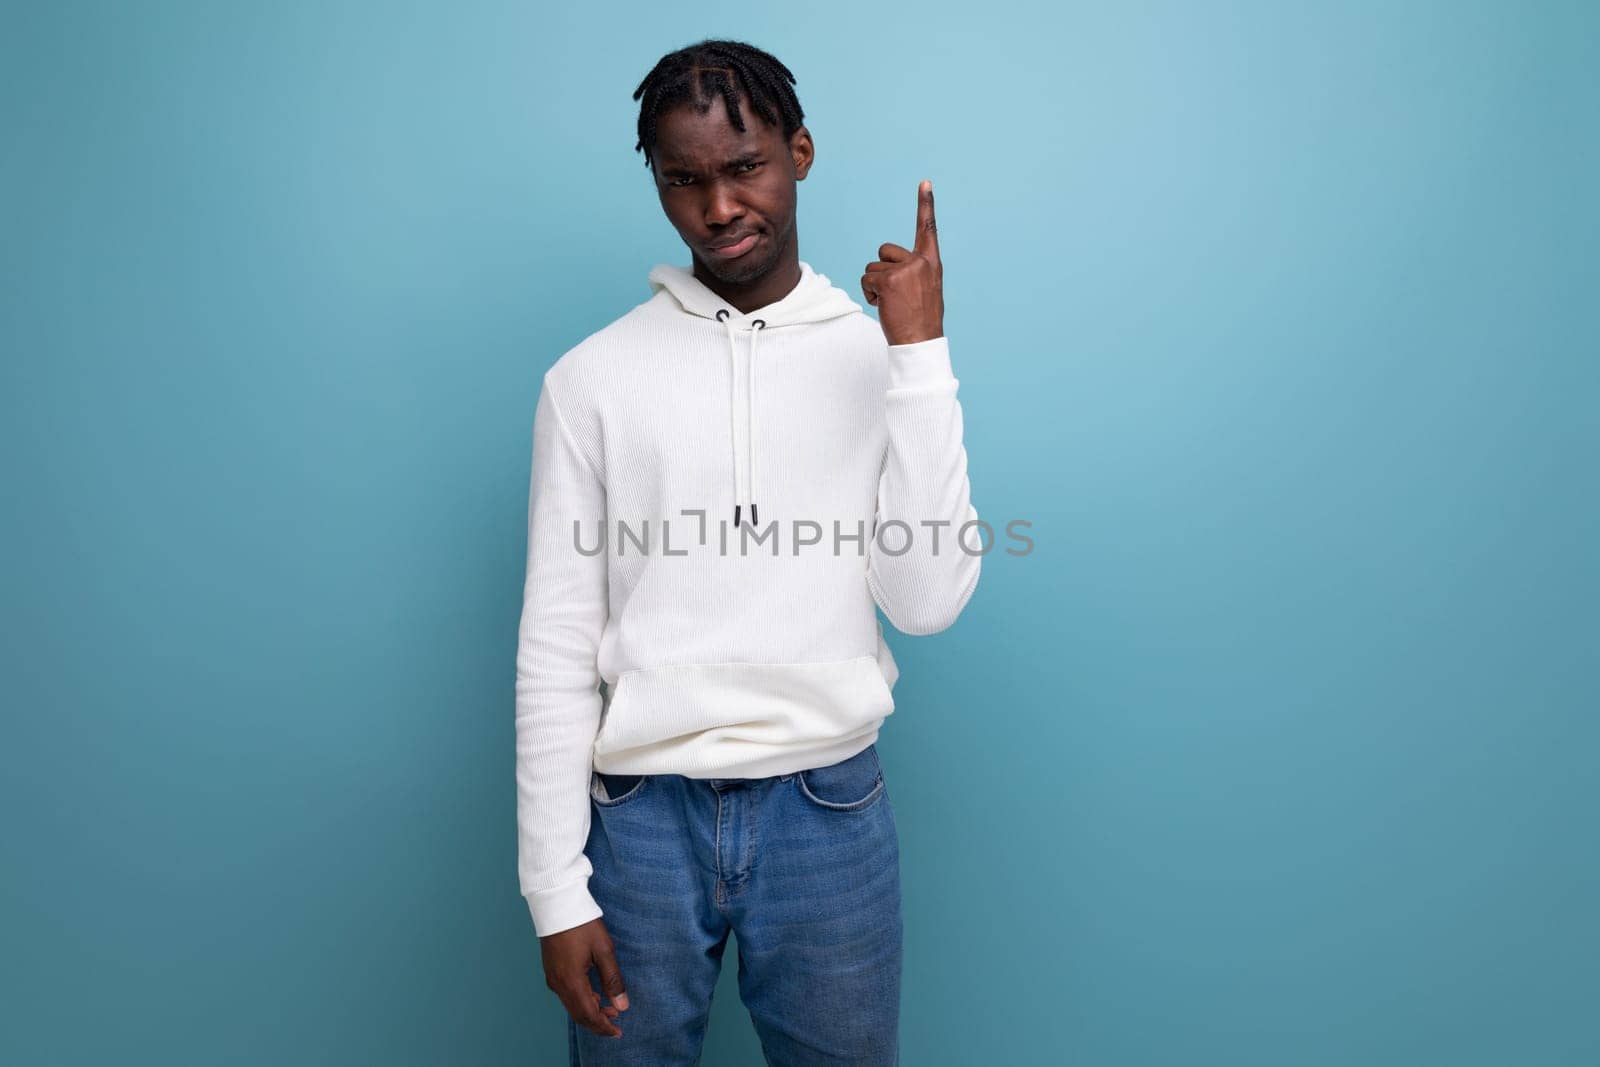 smart black american young man with dreadlocks showing thumbs up.